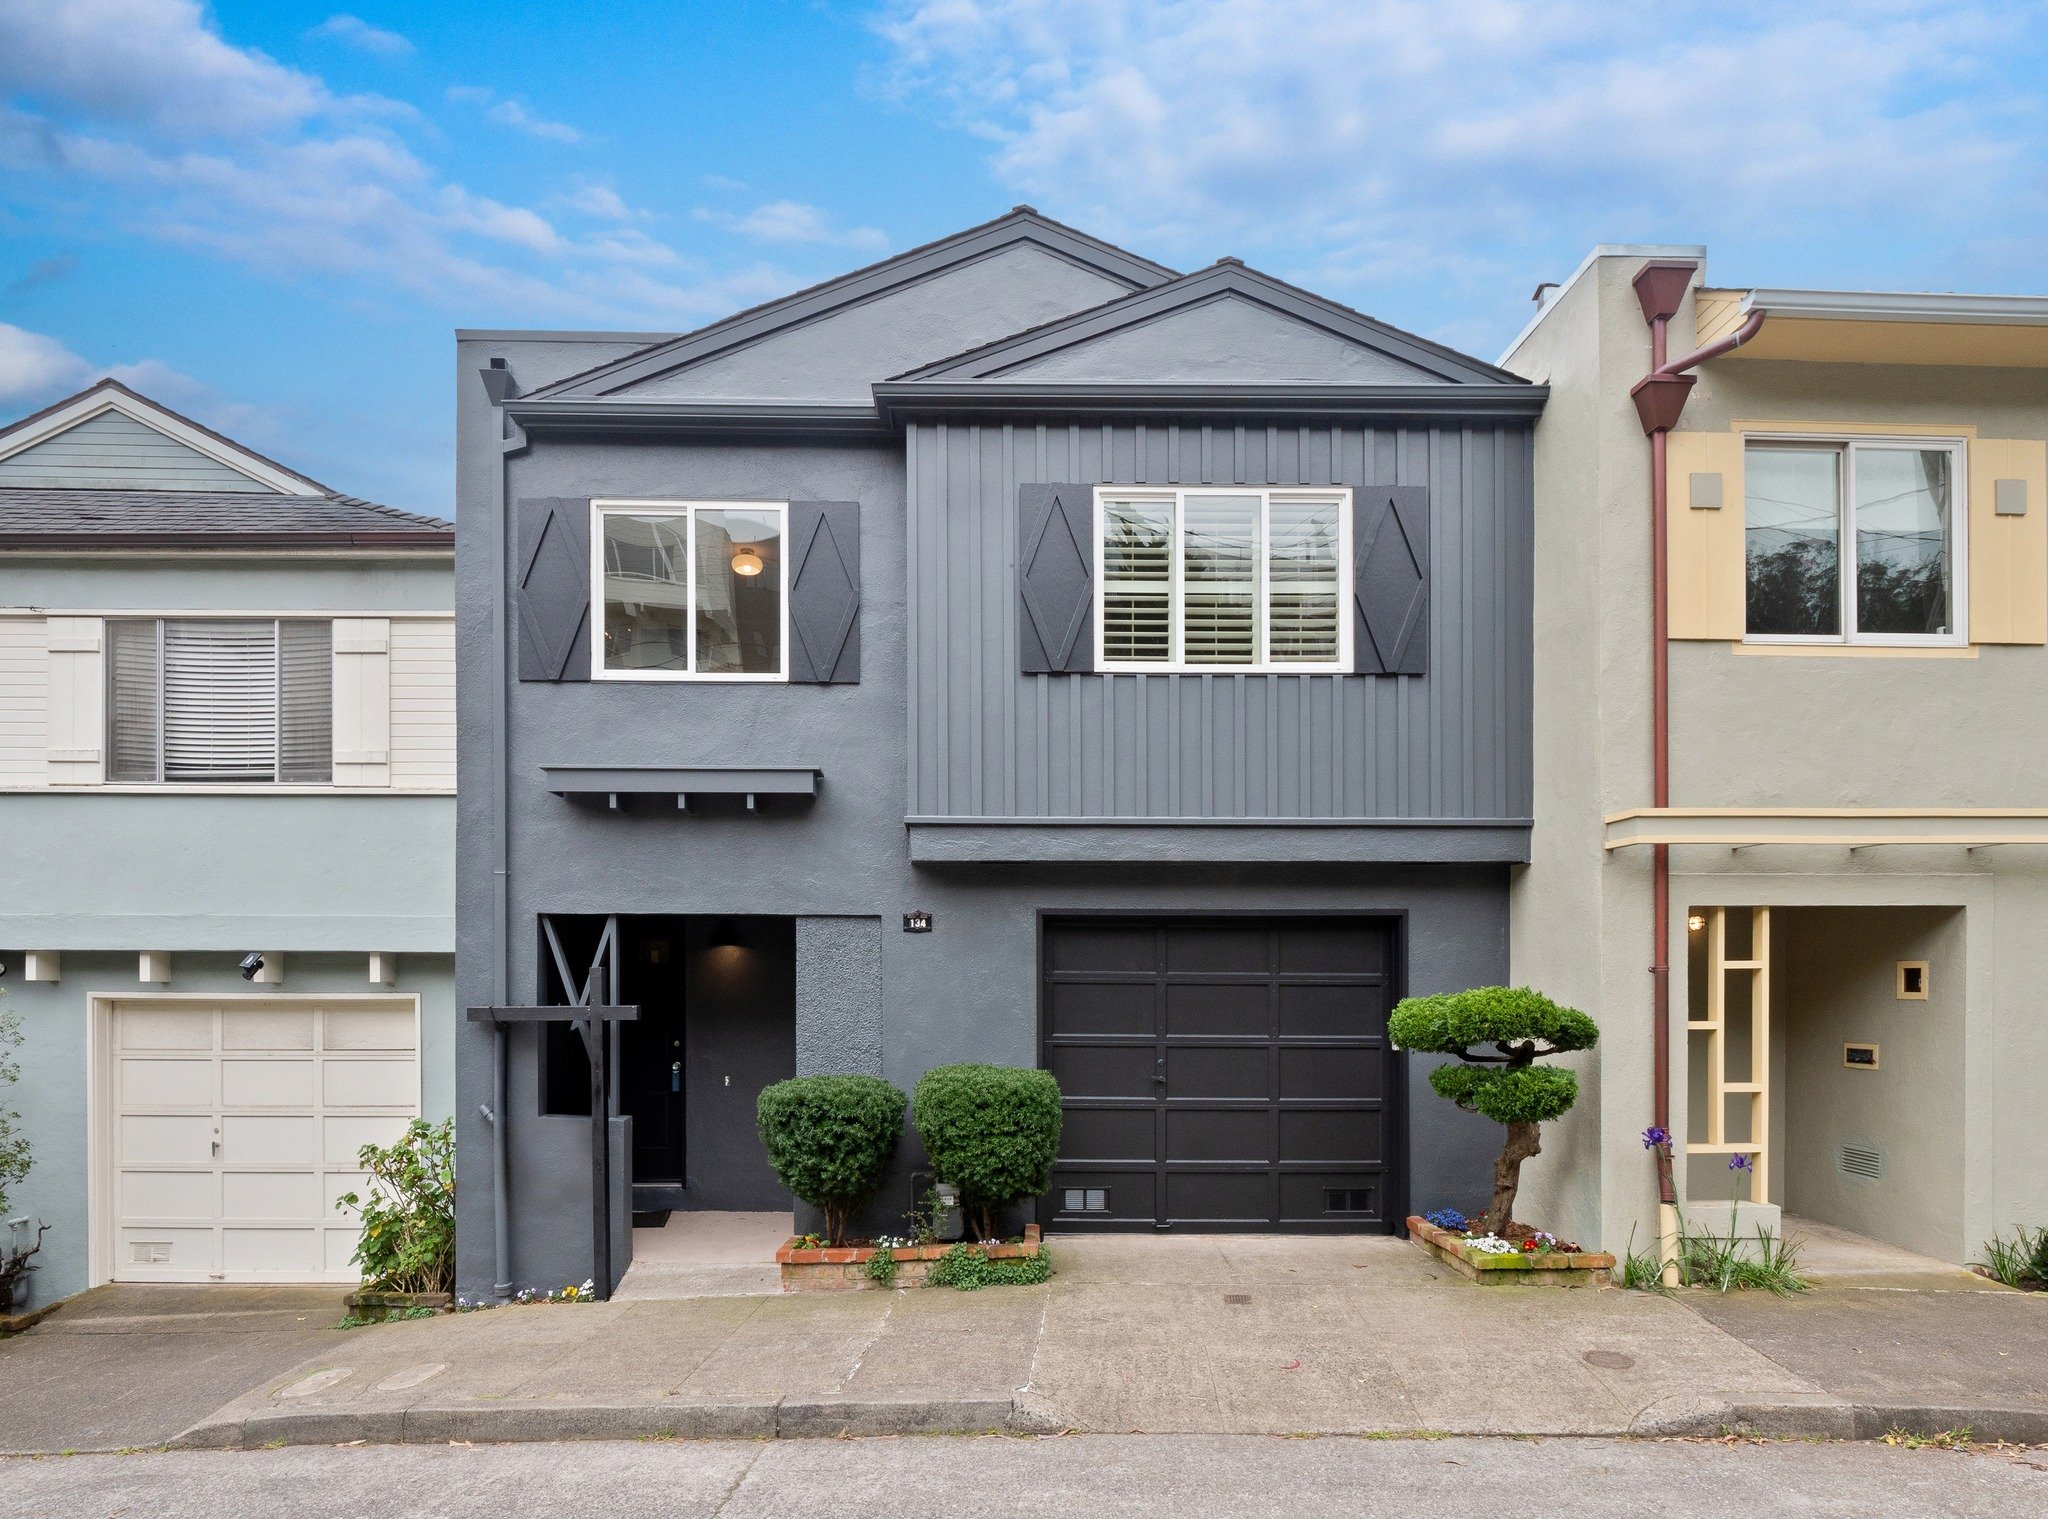 Recently Sold: 134 Stanford Heights🏠
Another look at this beautiful San Francisco home. Scroll to see more images of this lovely home that overlooks Excelsior, Daly City, and San Mateo. 😍

#recentlysold #01864179 #luxuryproperty #realtorchrisjurach